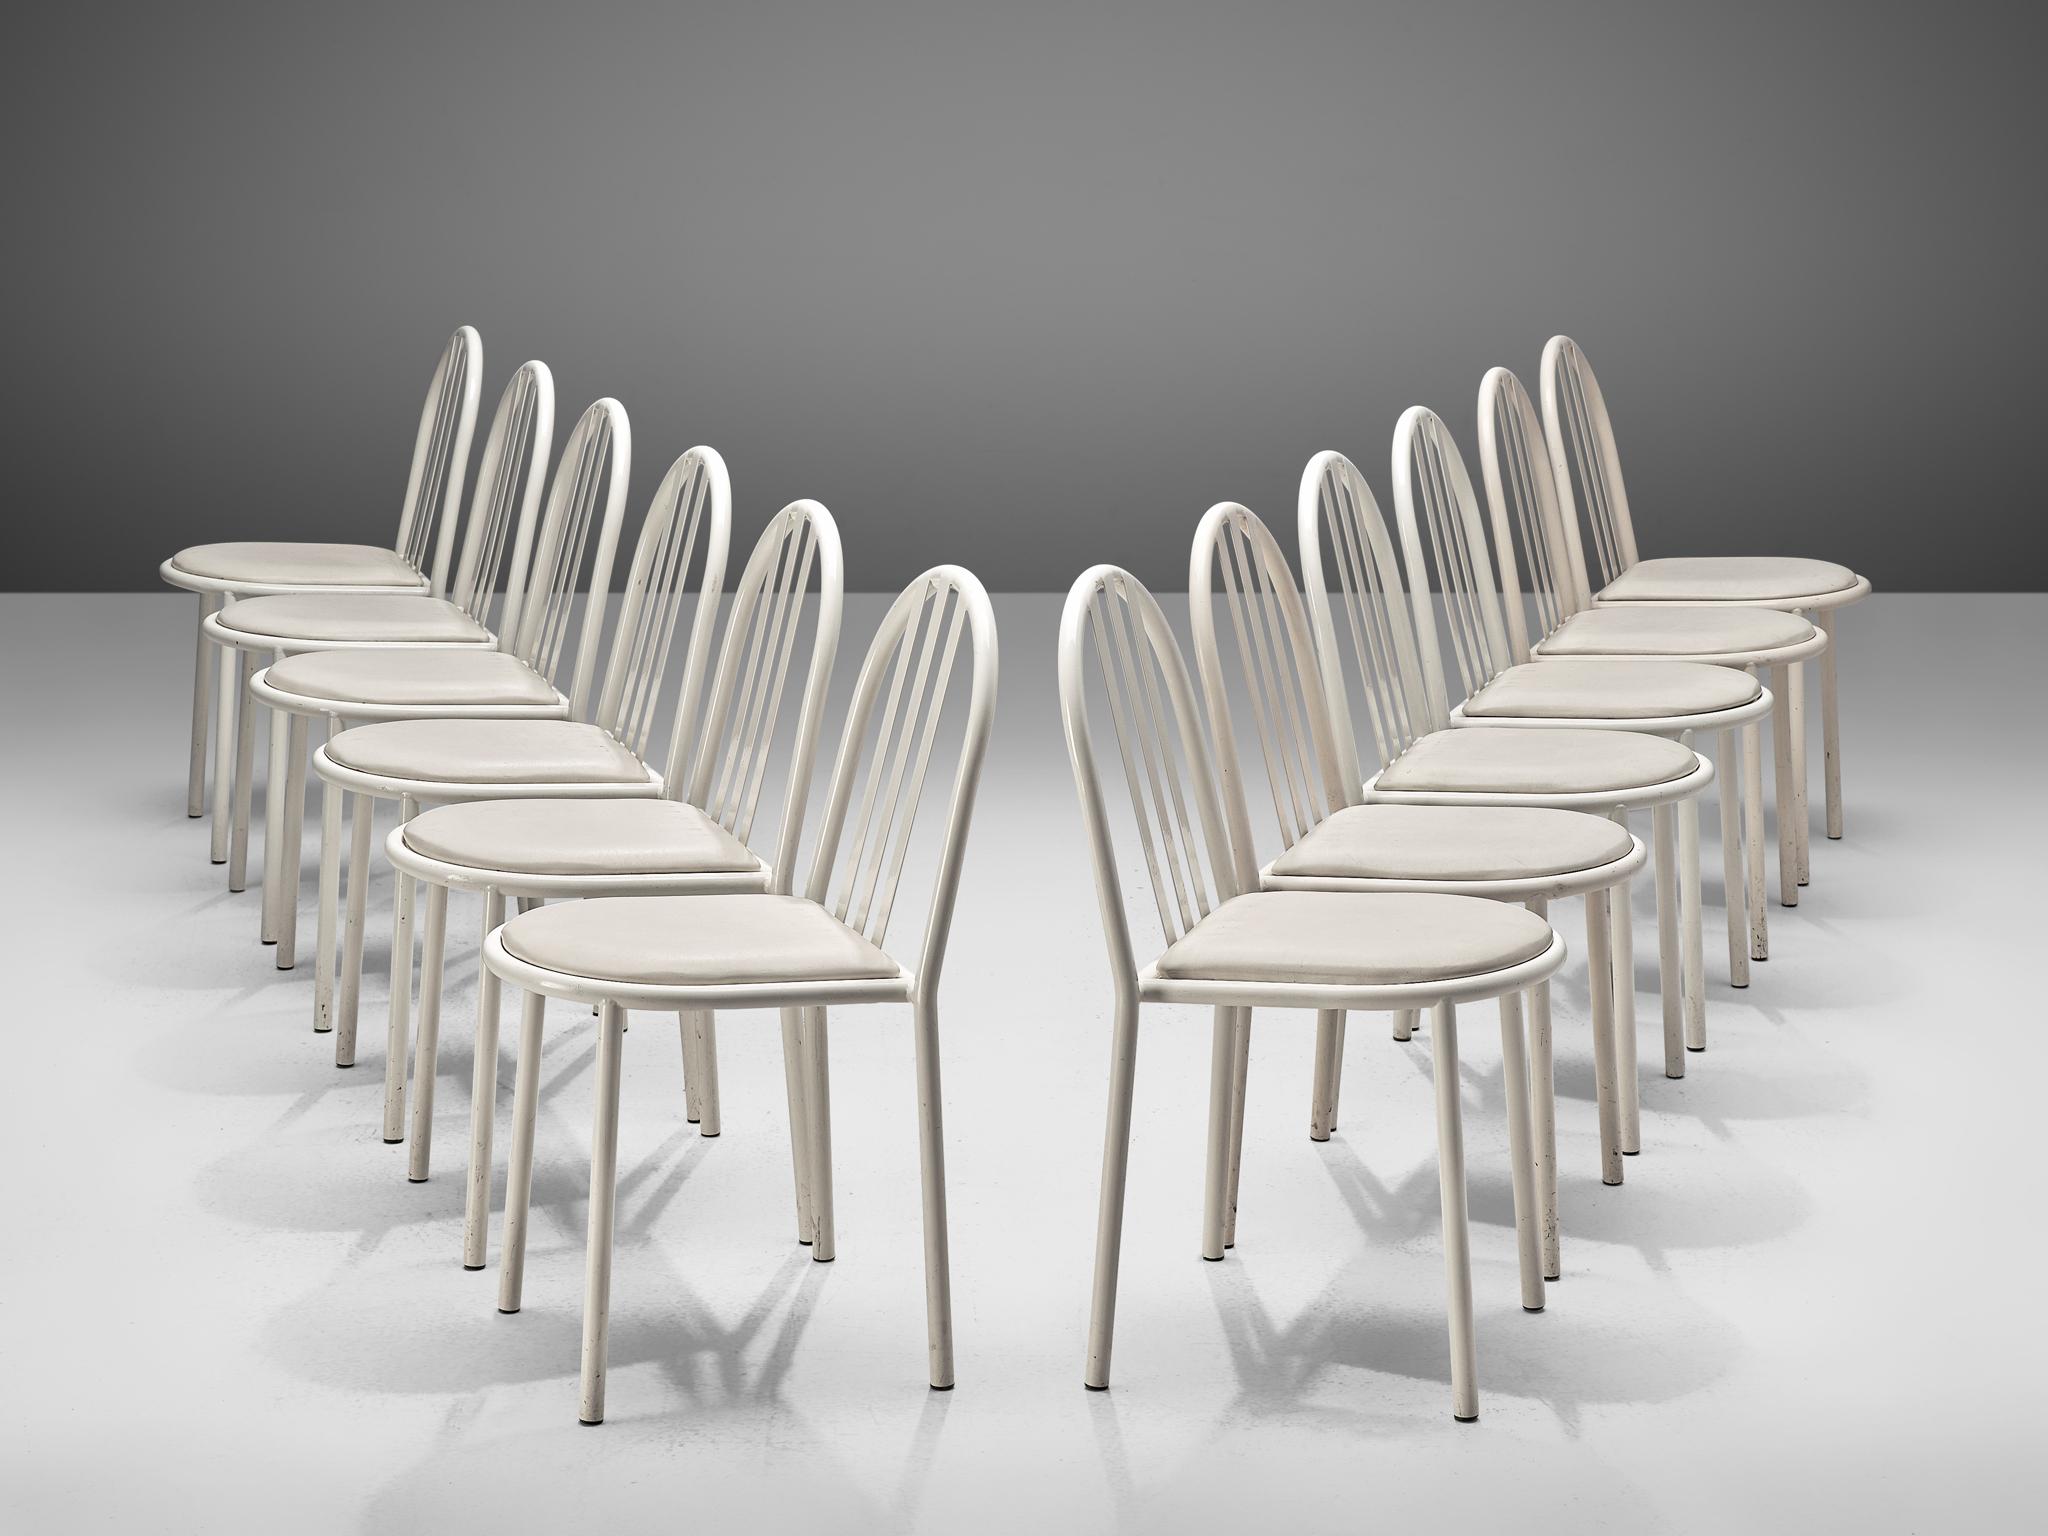 Robert Mallet Stevens for Stevens designs, set of 12 dining chairs, lacquered metal and leatherette, France, design 1928, production later.

Set of white lacquered tubular chairs designed by the one of the masters of the Modern architecture;